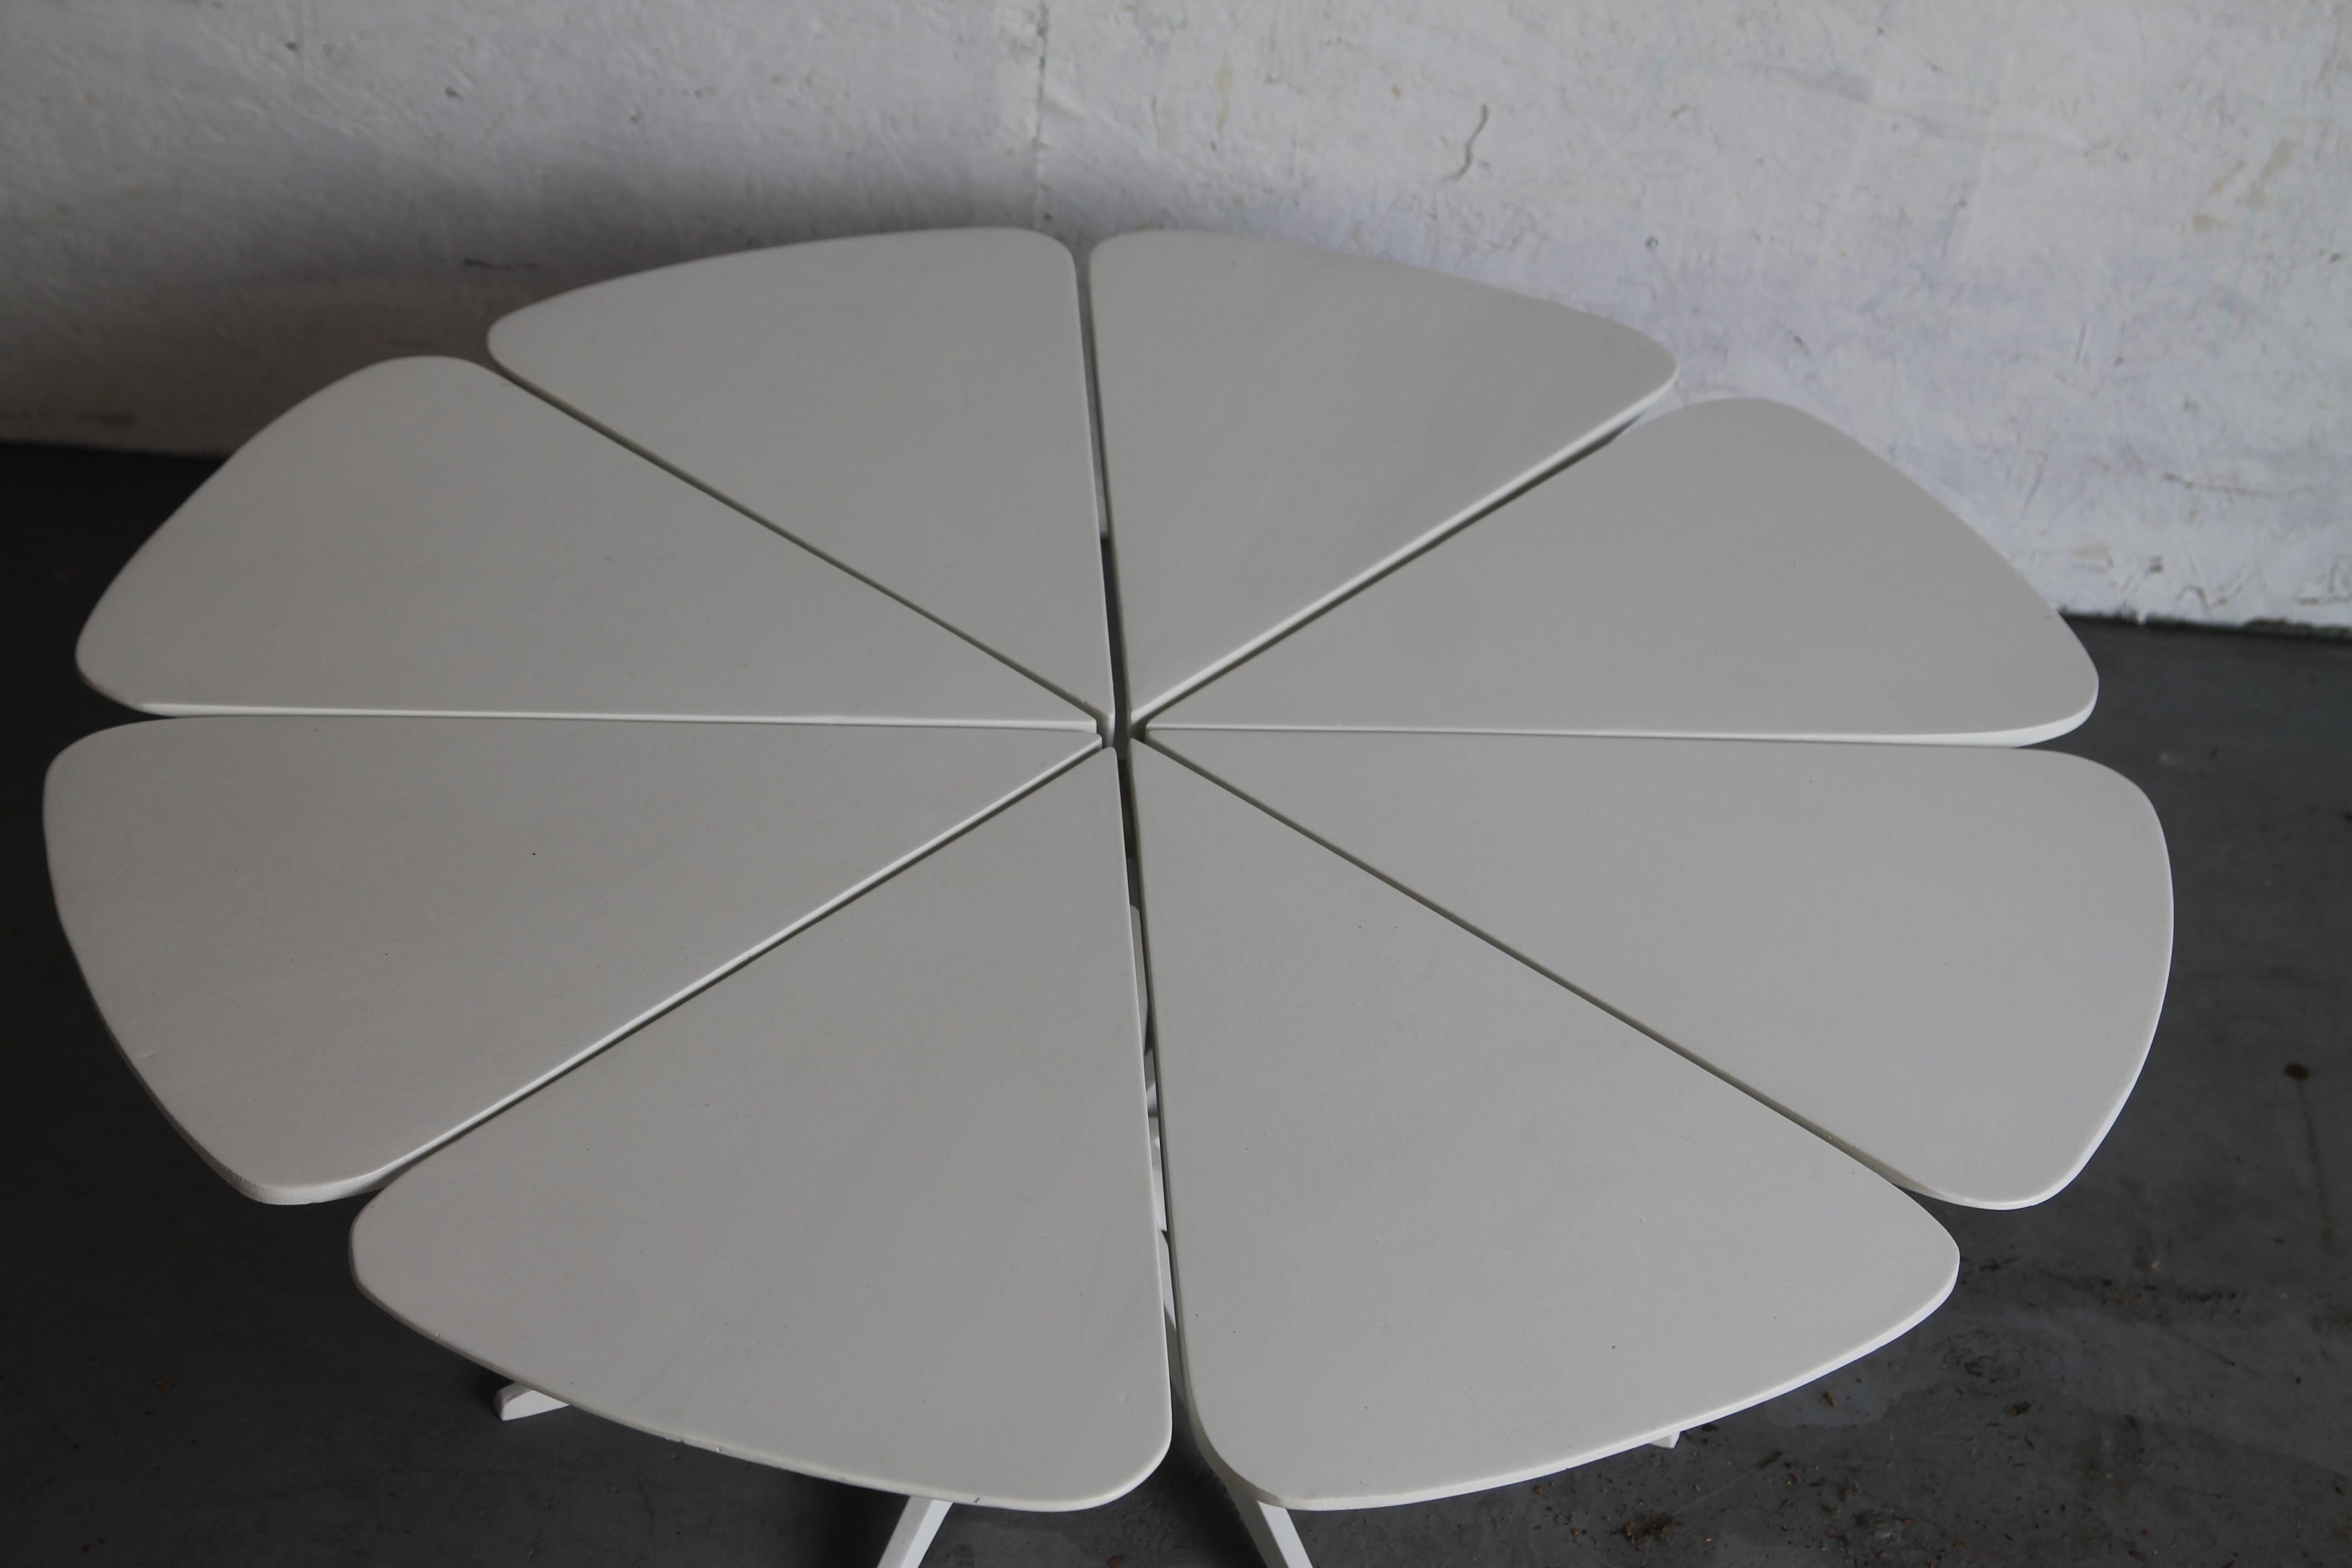 Iconic petal table designed by Richard Schullz for Knoll from 1960-1974. It is constructed with 8 redwood petals that are painted white. These sit on a 8 elongated metal feet. This was purchased from the original owners who got it in the 1960s. 